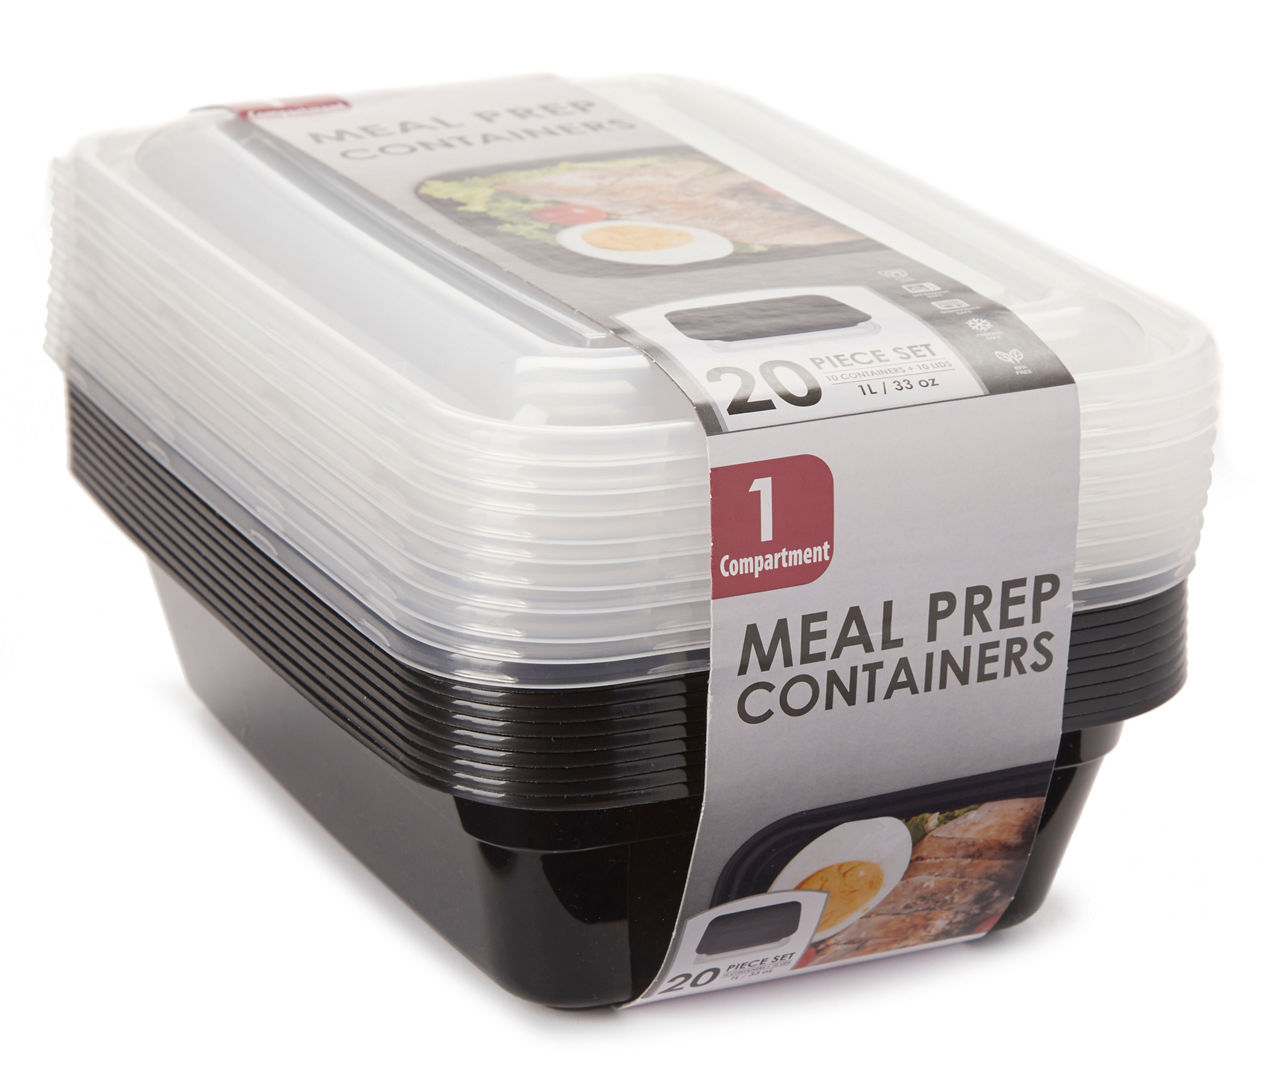 10 Packs 30 oz Glass Meal Prep Containers - Silver